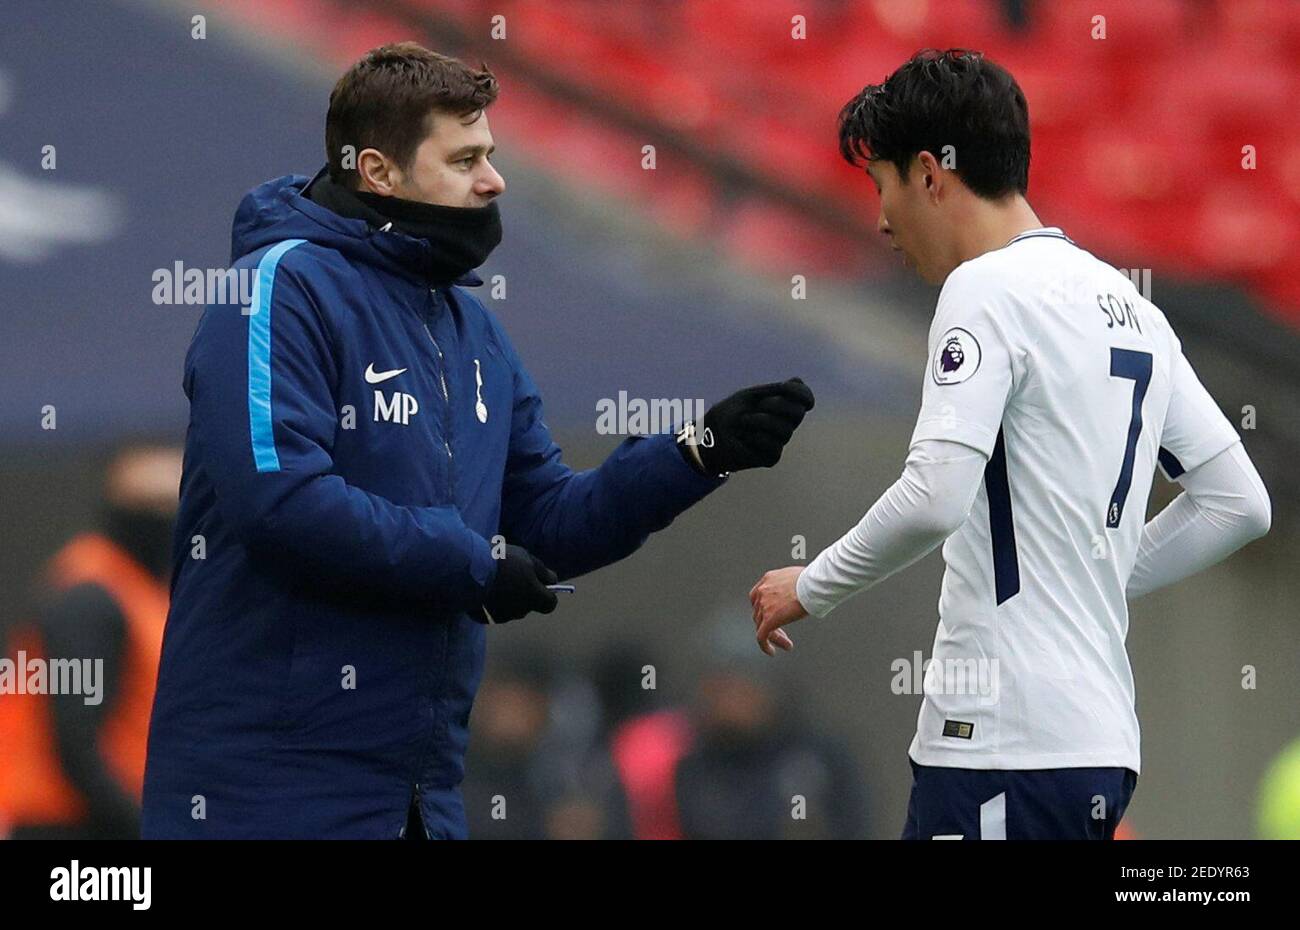 Soccer Football - Premier League - Tottenham Hotspur vs Huddersfield Town - Wembley Stadium, London, Britain - March 3, 2018   Tottenham's Son Heung-min with manager Mauricio Pochettino    REUTERS/Eddie Keogh    EDITORIAL USE ONLY. No use with unauthorized audio, video, data, fixture lists, club/league logos or 'live' services. Online in-match use limited to 75 images, no video emulation. No use in betting, games or single club/league/player publications.  Please contact your account representative for further details. Stock Photo